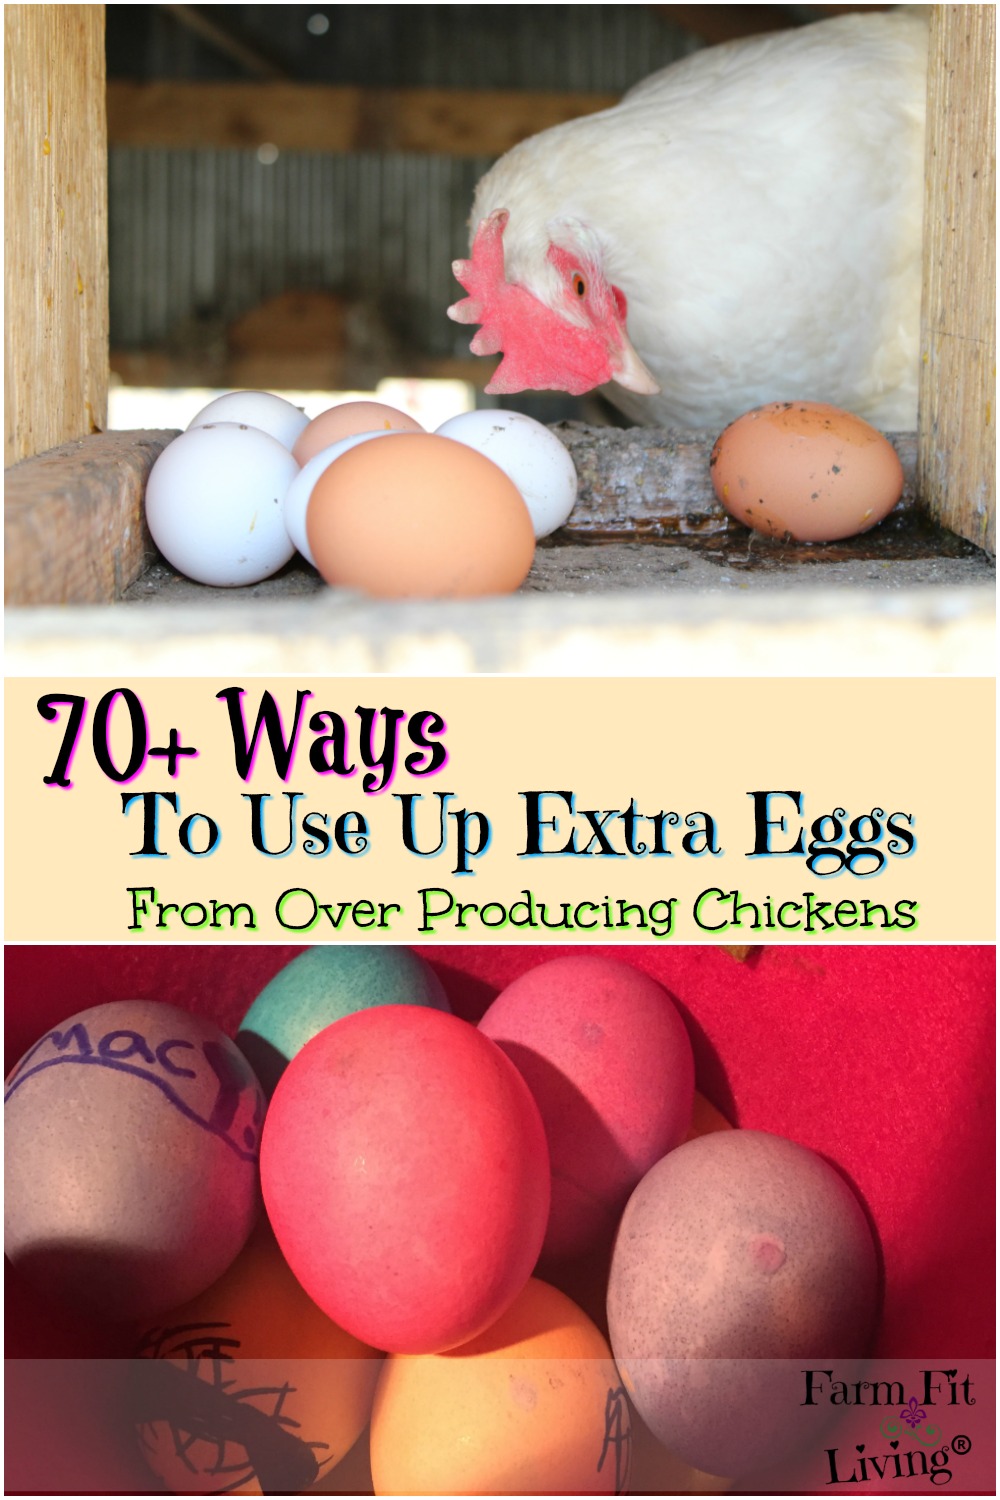 Ways to use up extra eggs